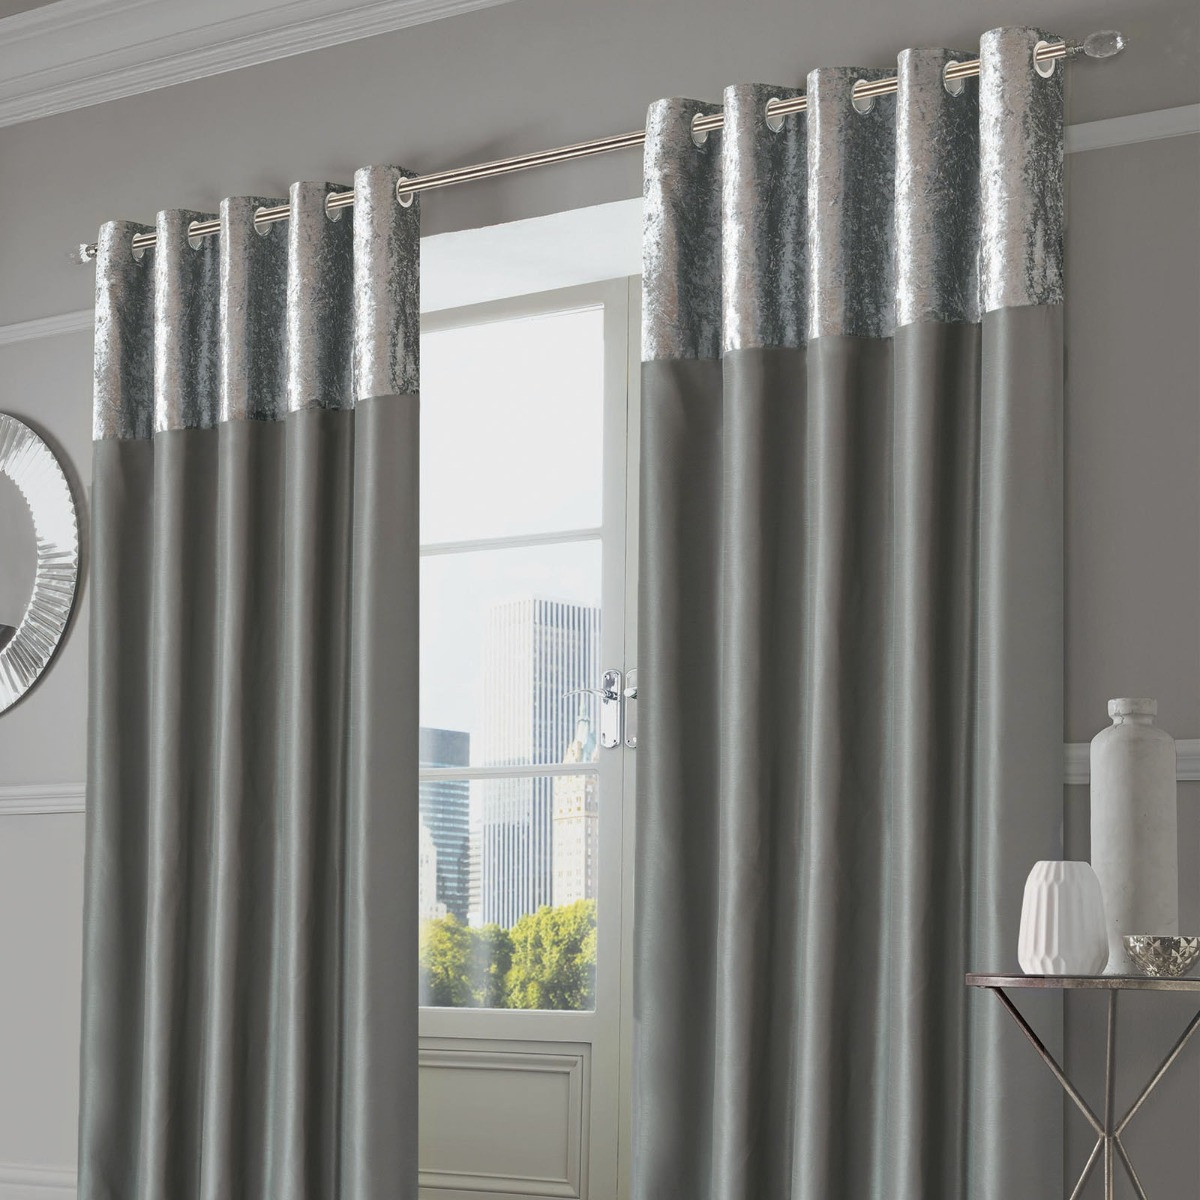 Sienna Home Crushed Velvet Band Eyelet Curtains, Silver Grey - 46"x72">